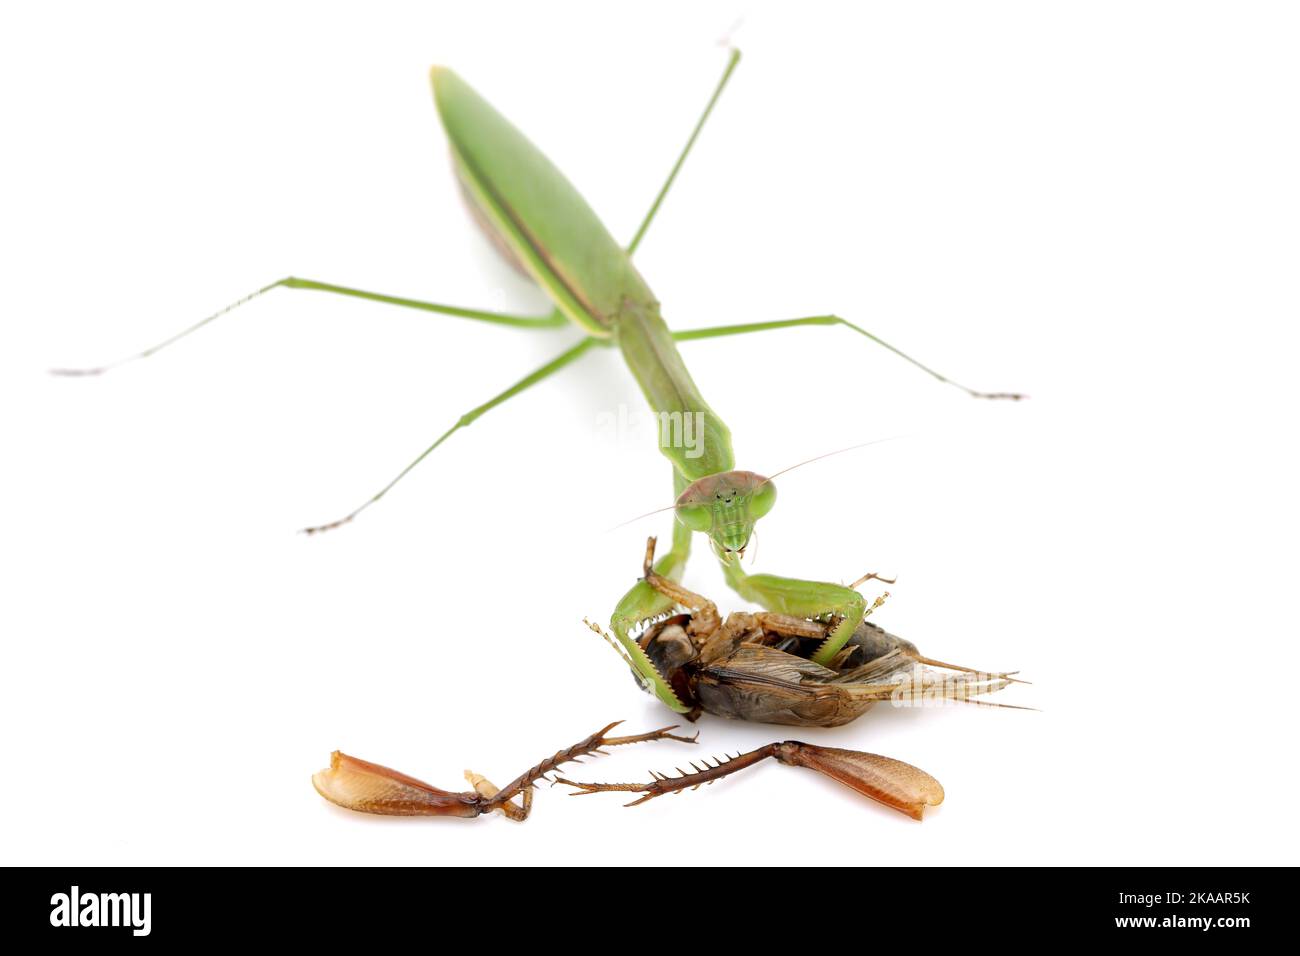 Praying mantis catching prey, a cricket. isolated on a white background Stock Photo